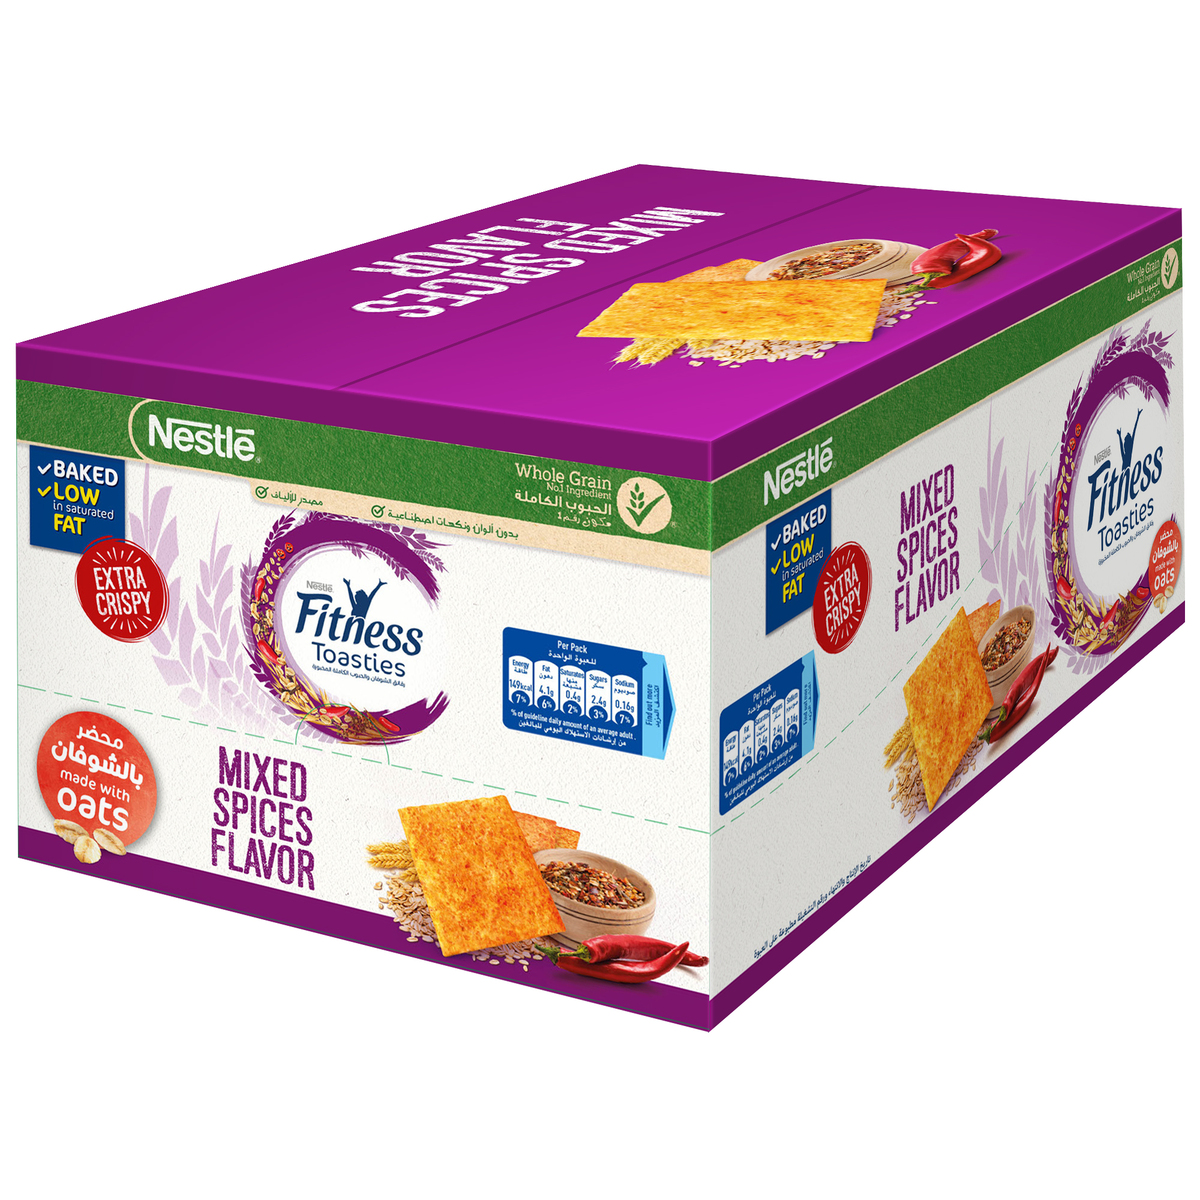 Nestle Fitness Toasties Oats Mixed Spices 36 g